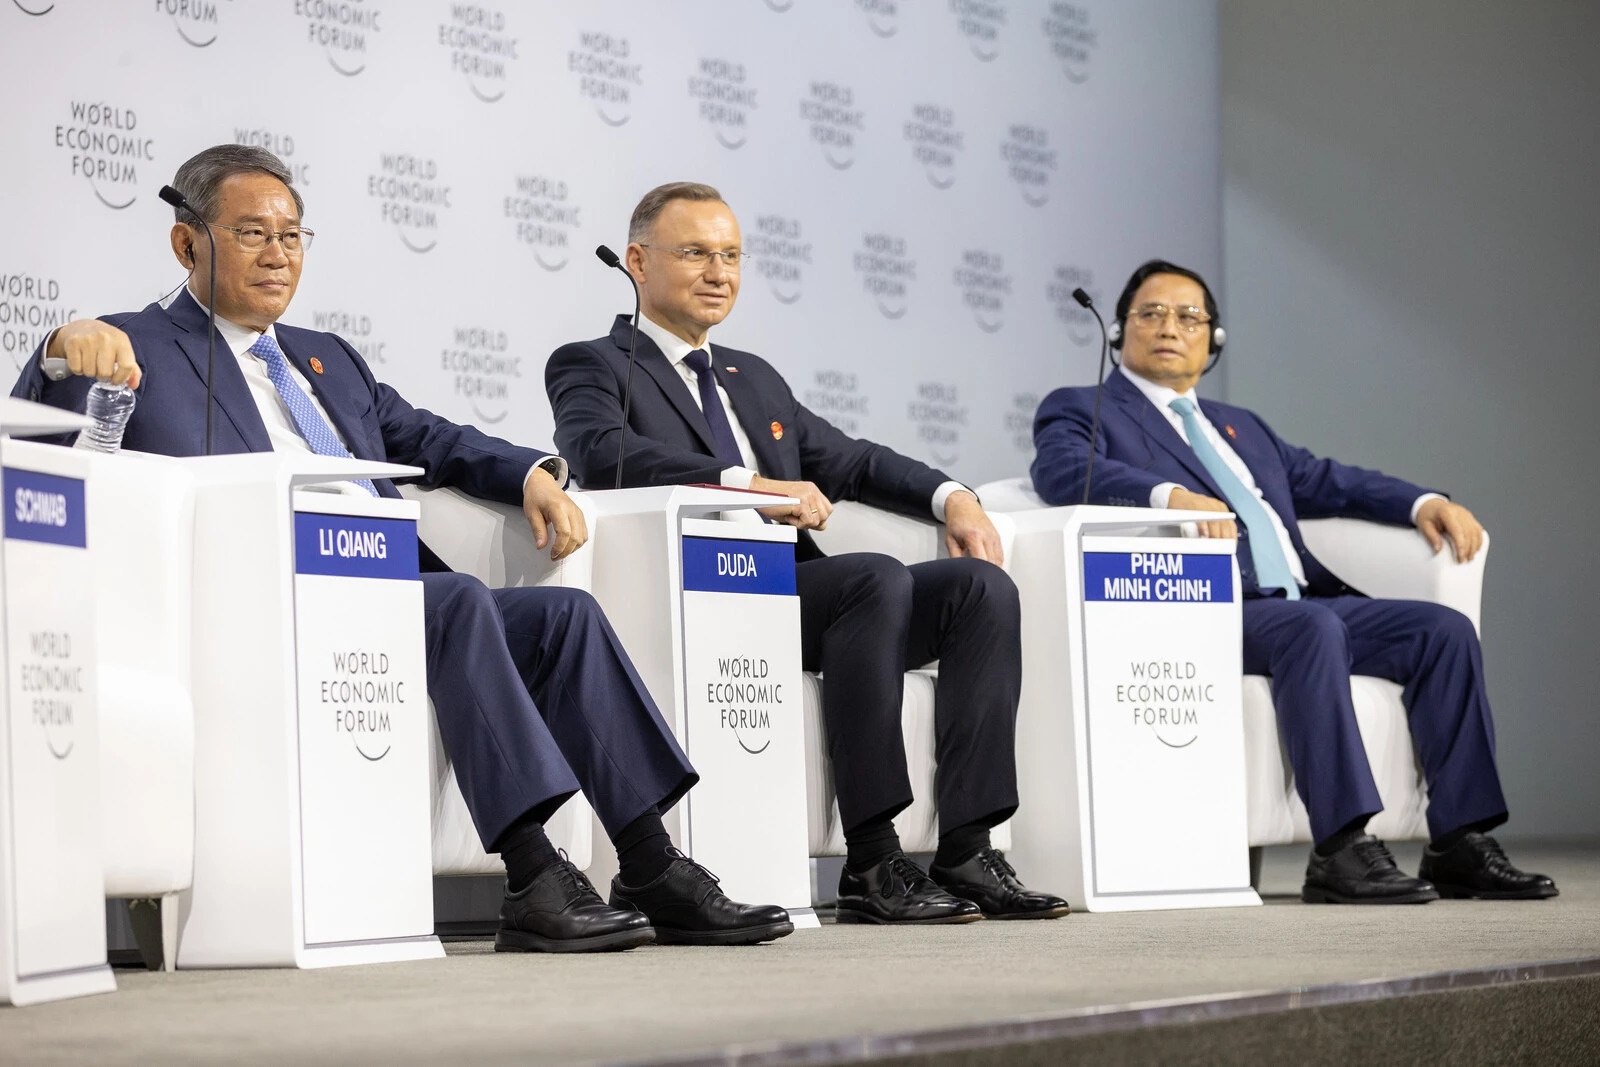 World leaders address WEF conference